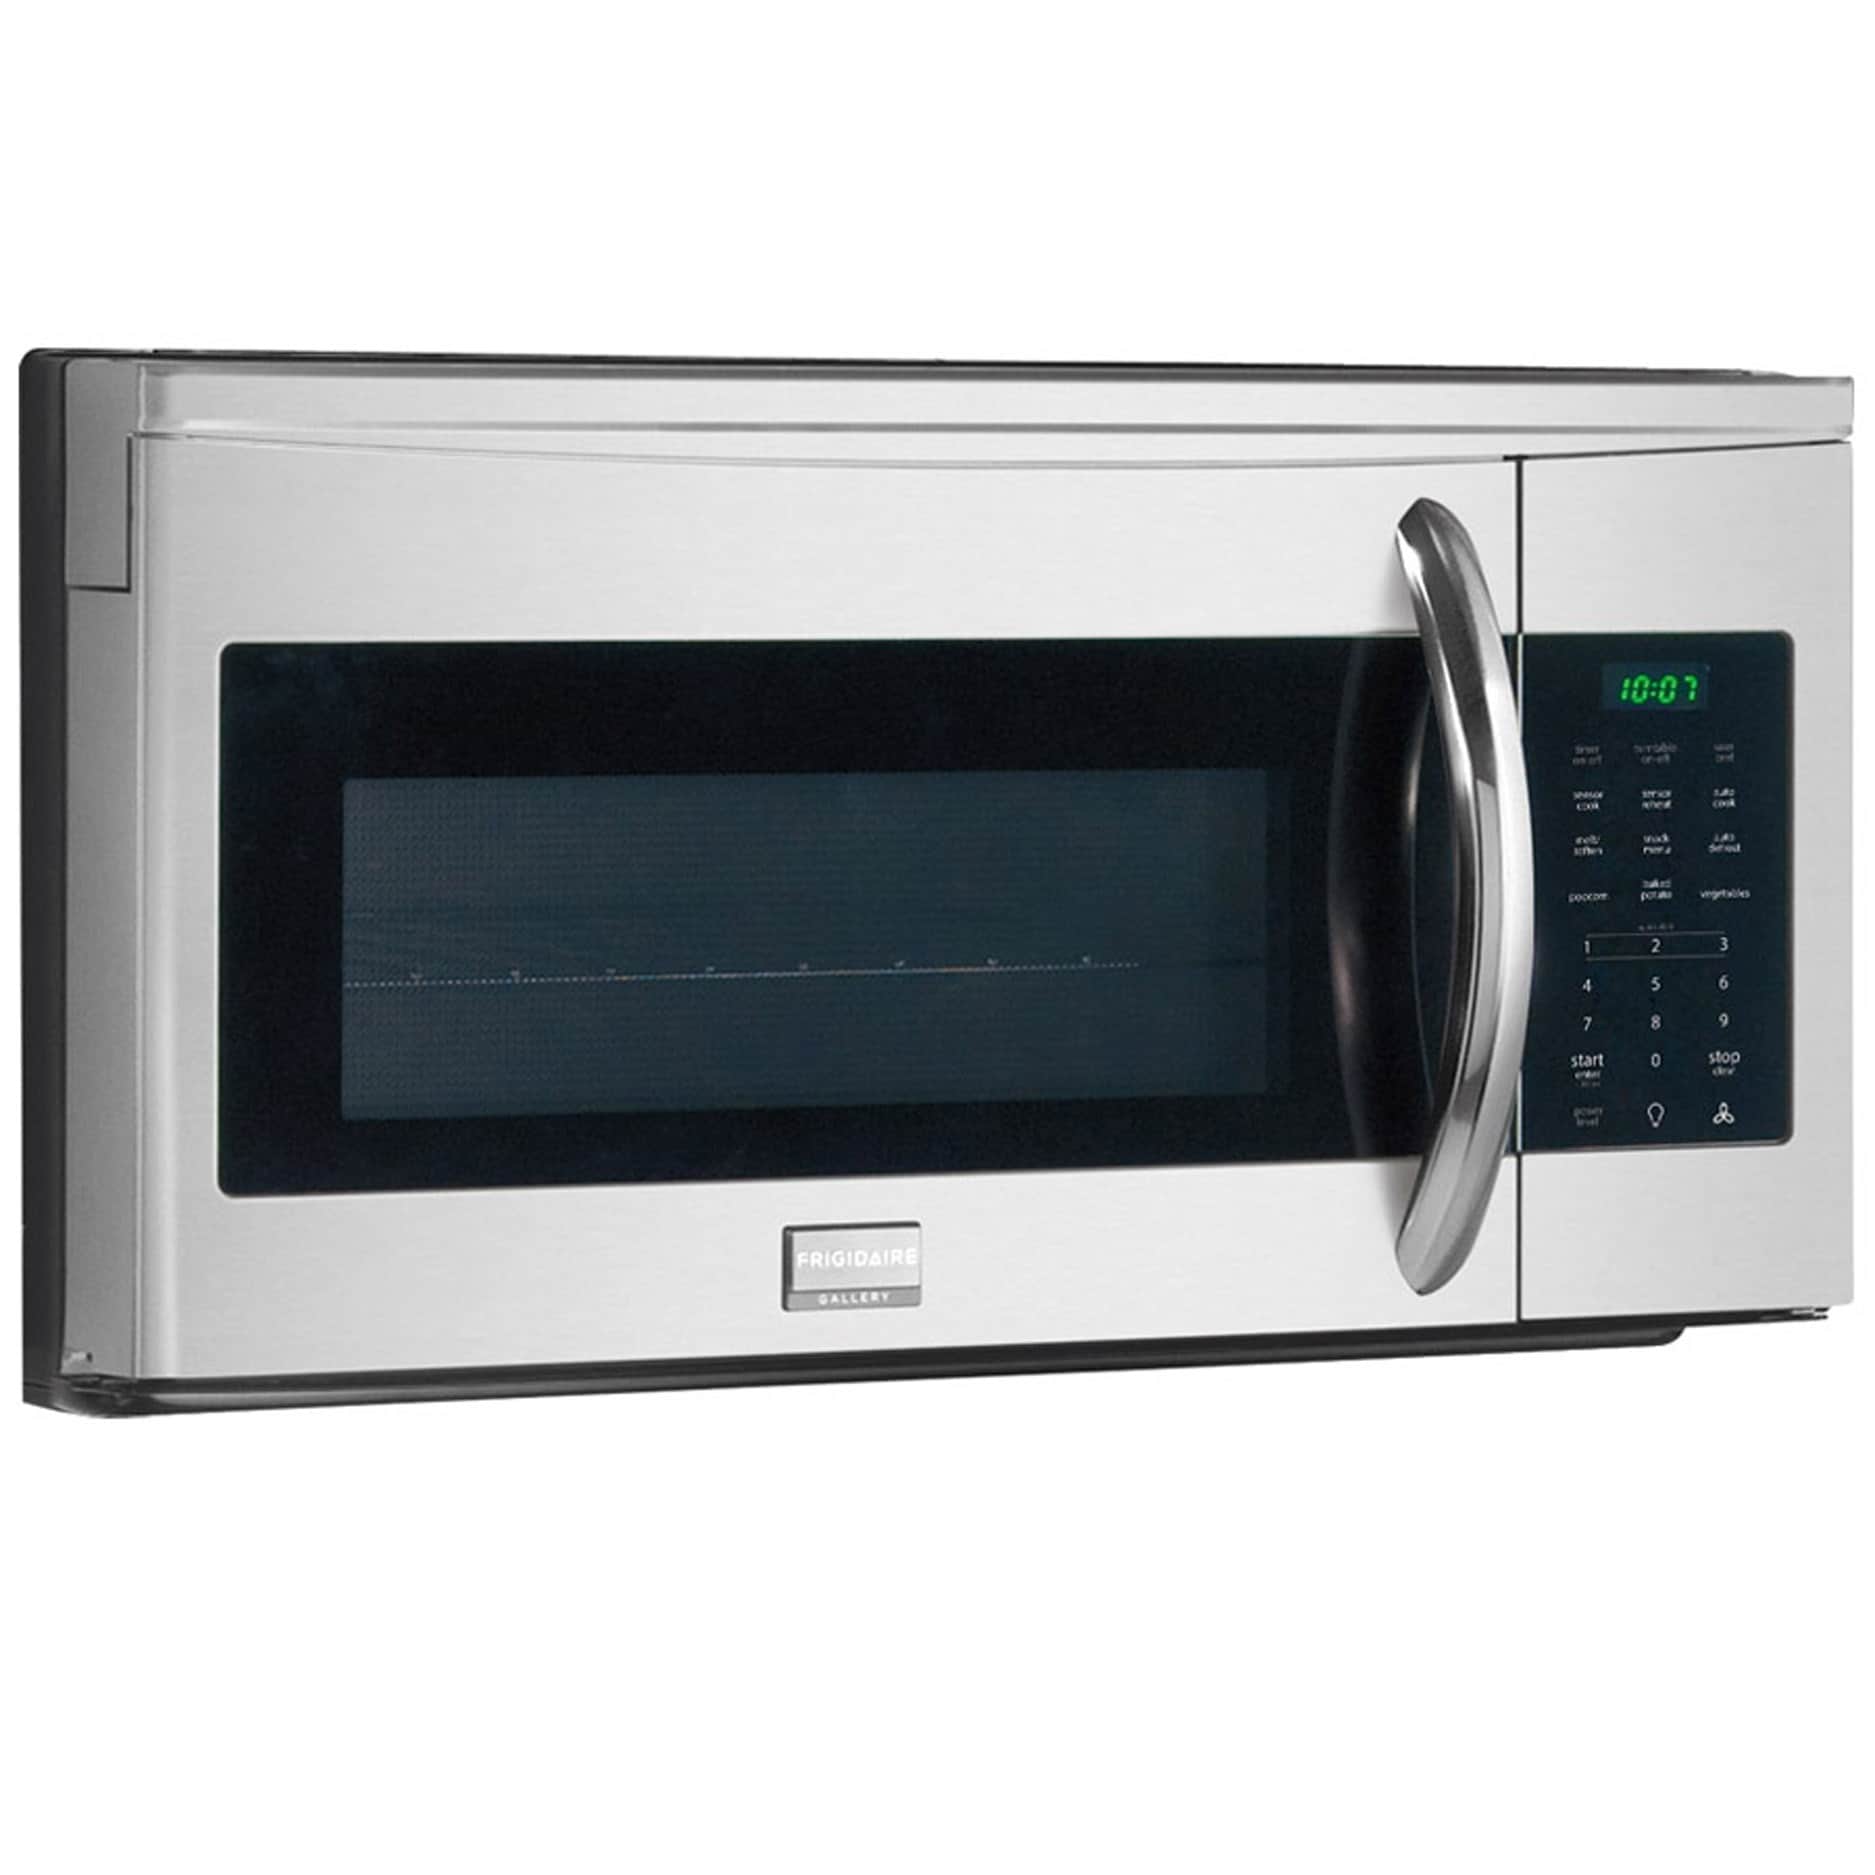 frigidaire-gallery-1-7-cu-ft-over-the-range-microwave-with-sensor